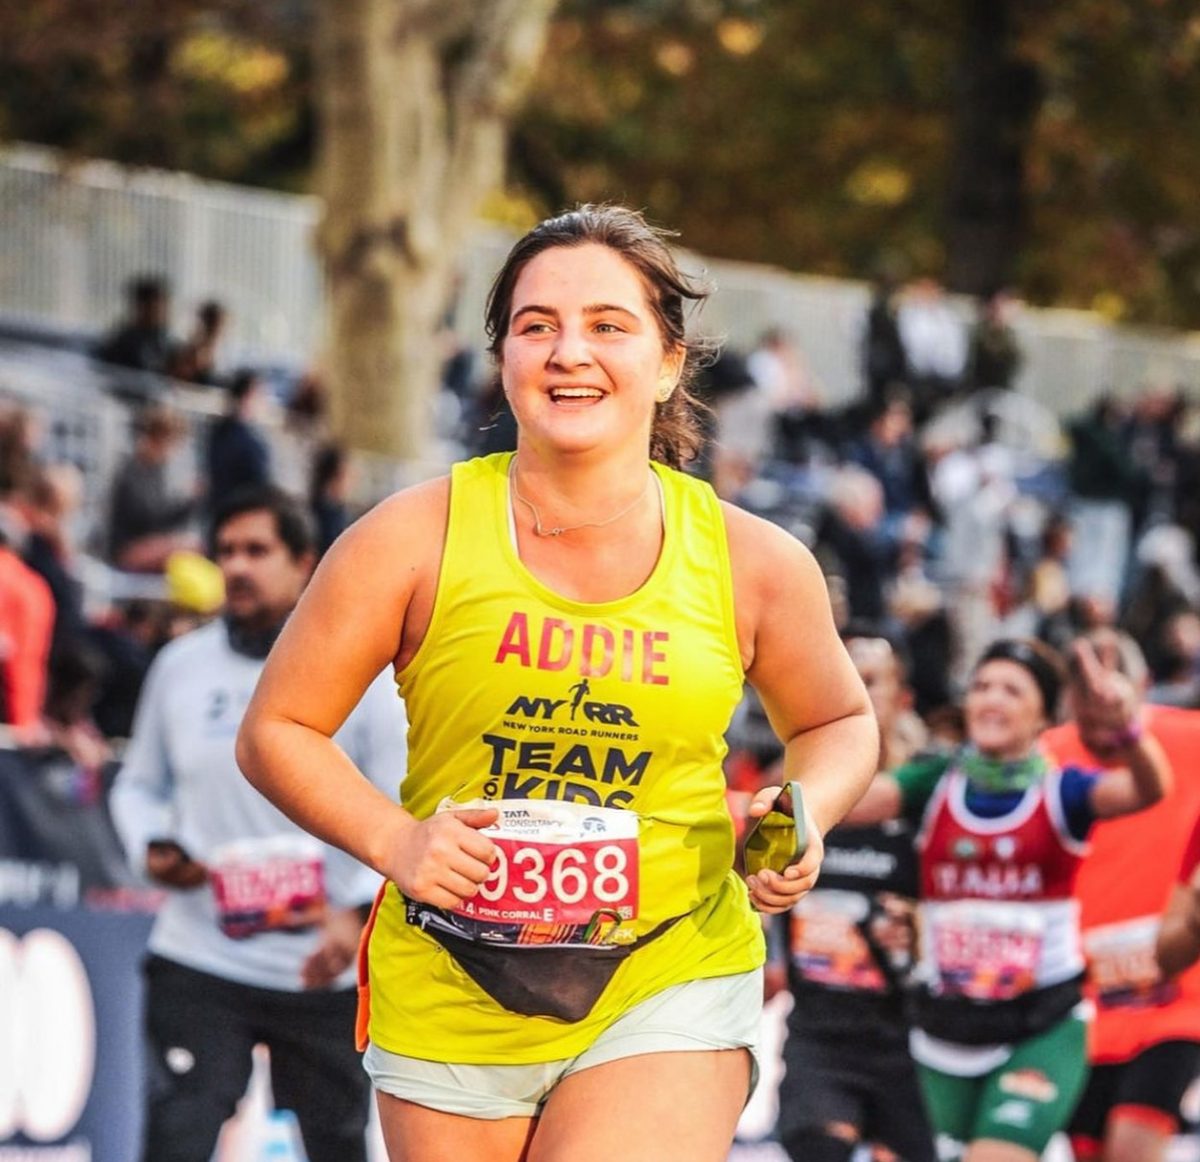 Addie-Grace+Cook%2C+%E2%80%9826%2C+runs+with+a+smile+through+the+boroughs+of+New+York+City+in+early+November%2C+completing+a+marathon.+Photo+courtesy+of+Cook